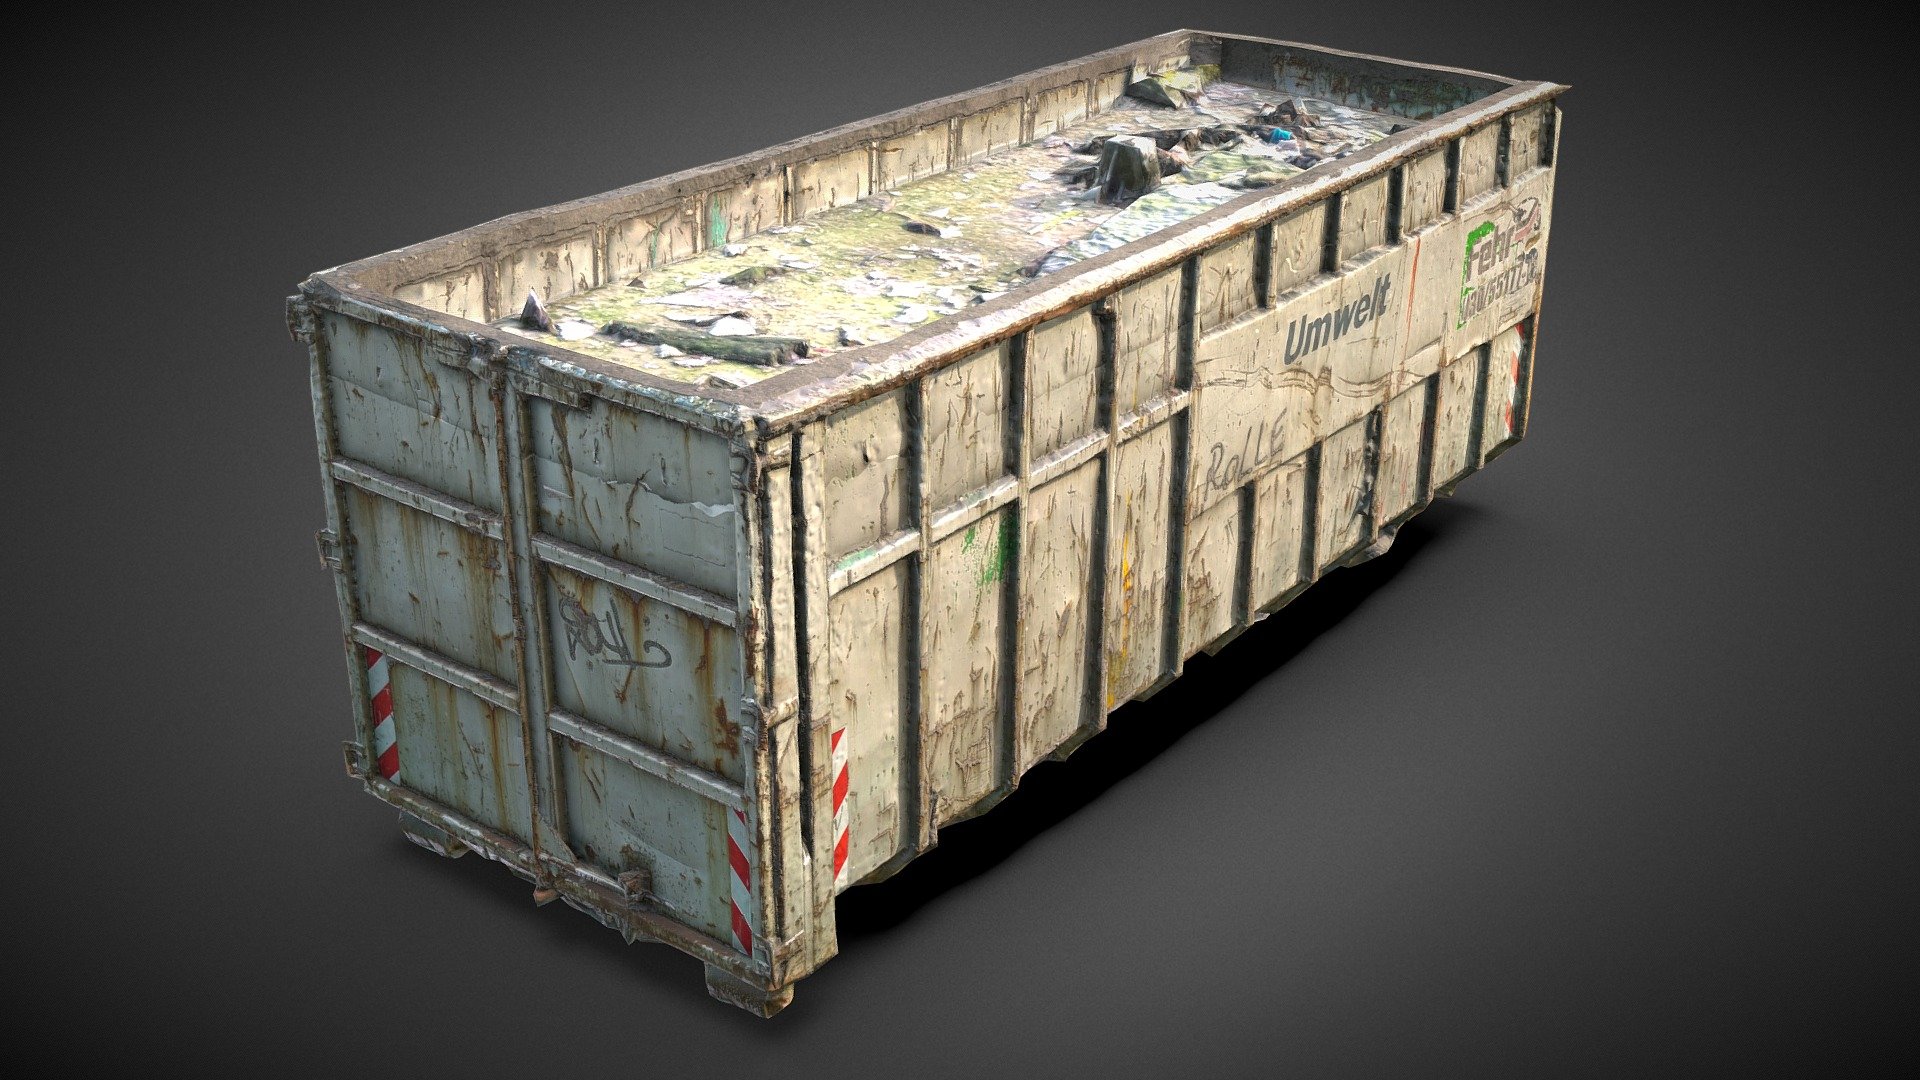 Low poly gameready asset made from scan of a gravel 30ft container. Found in Berlin a few years ago *
4K PBR textures (basecolor roughness normal) with delighted basecolor. Perfect to add detail and realism to your game/ 3d scene 3d model